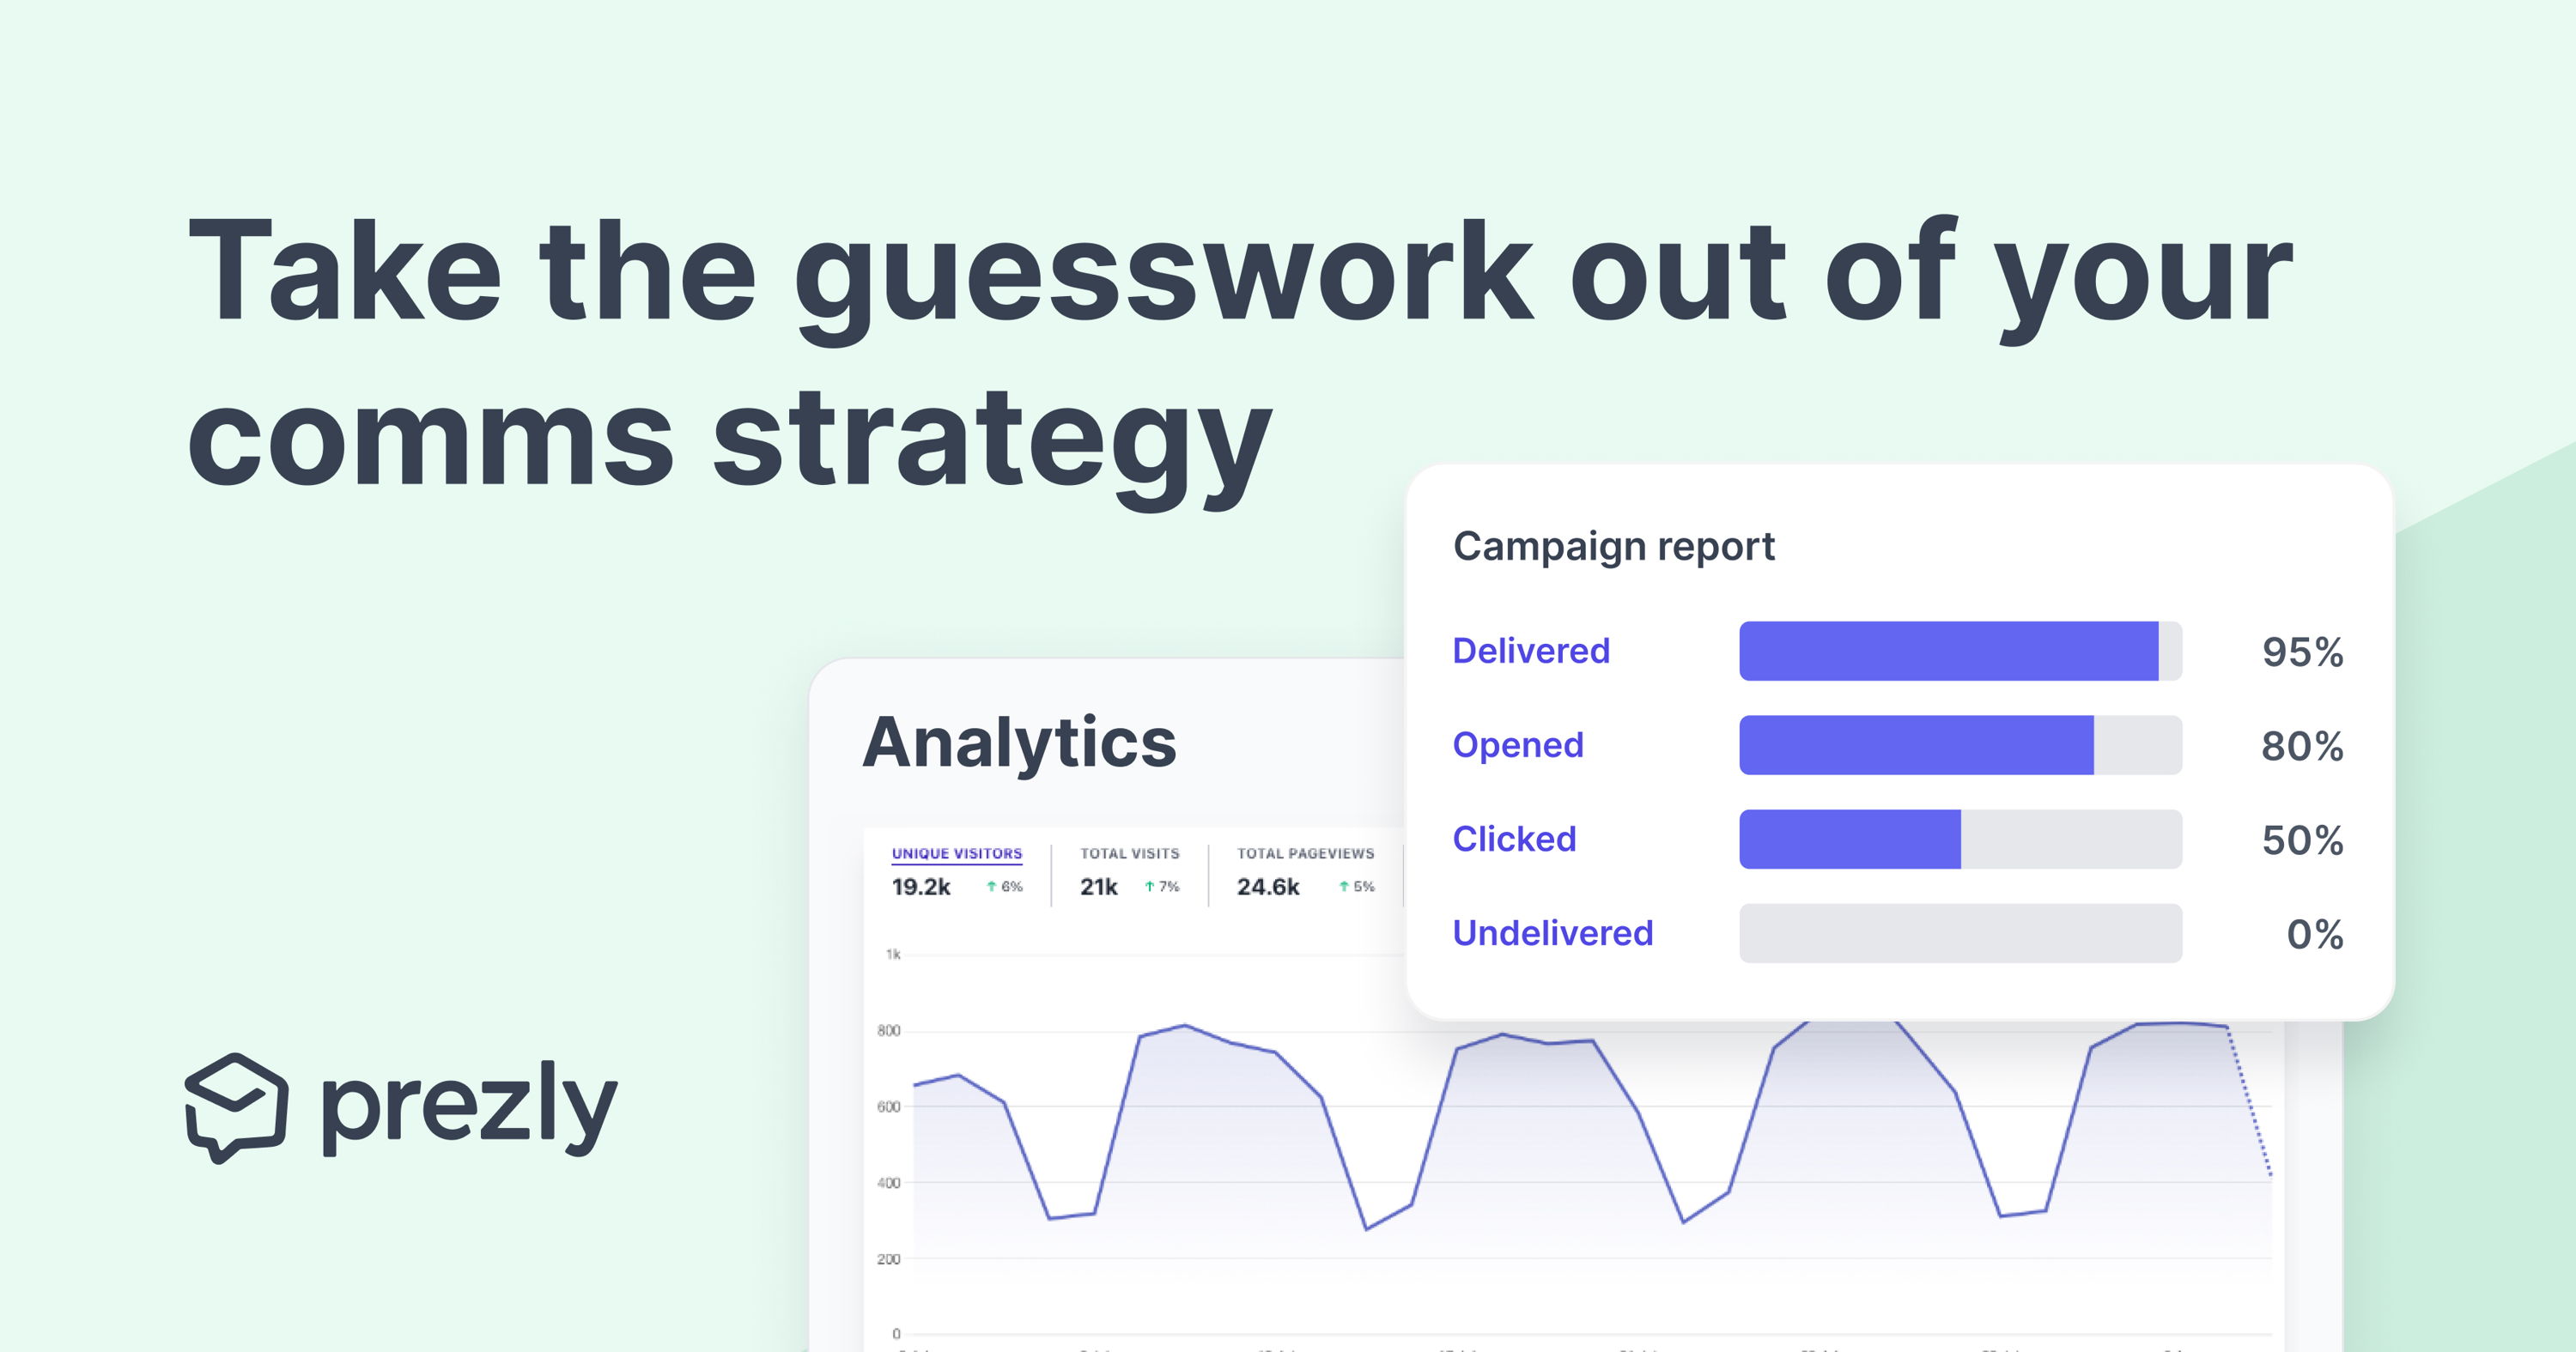 Take the guesswork out of your comms strategy with Prezly